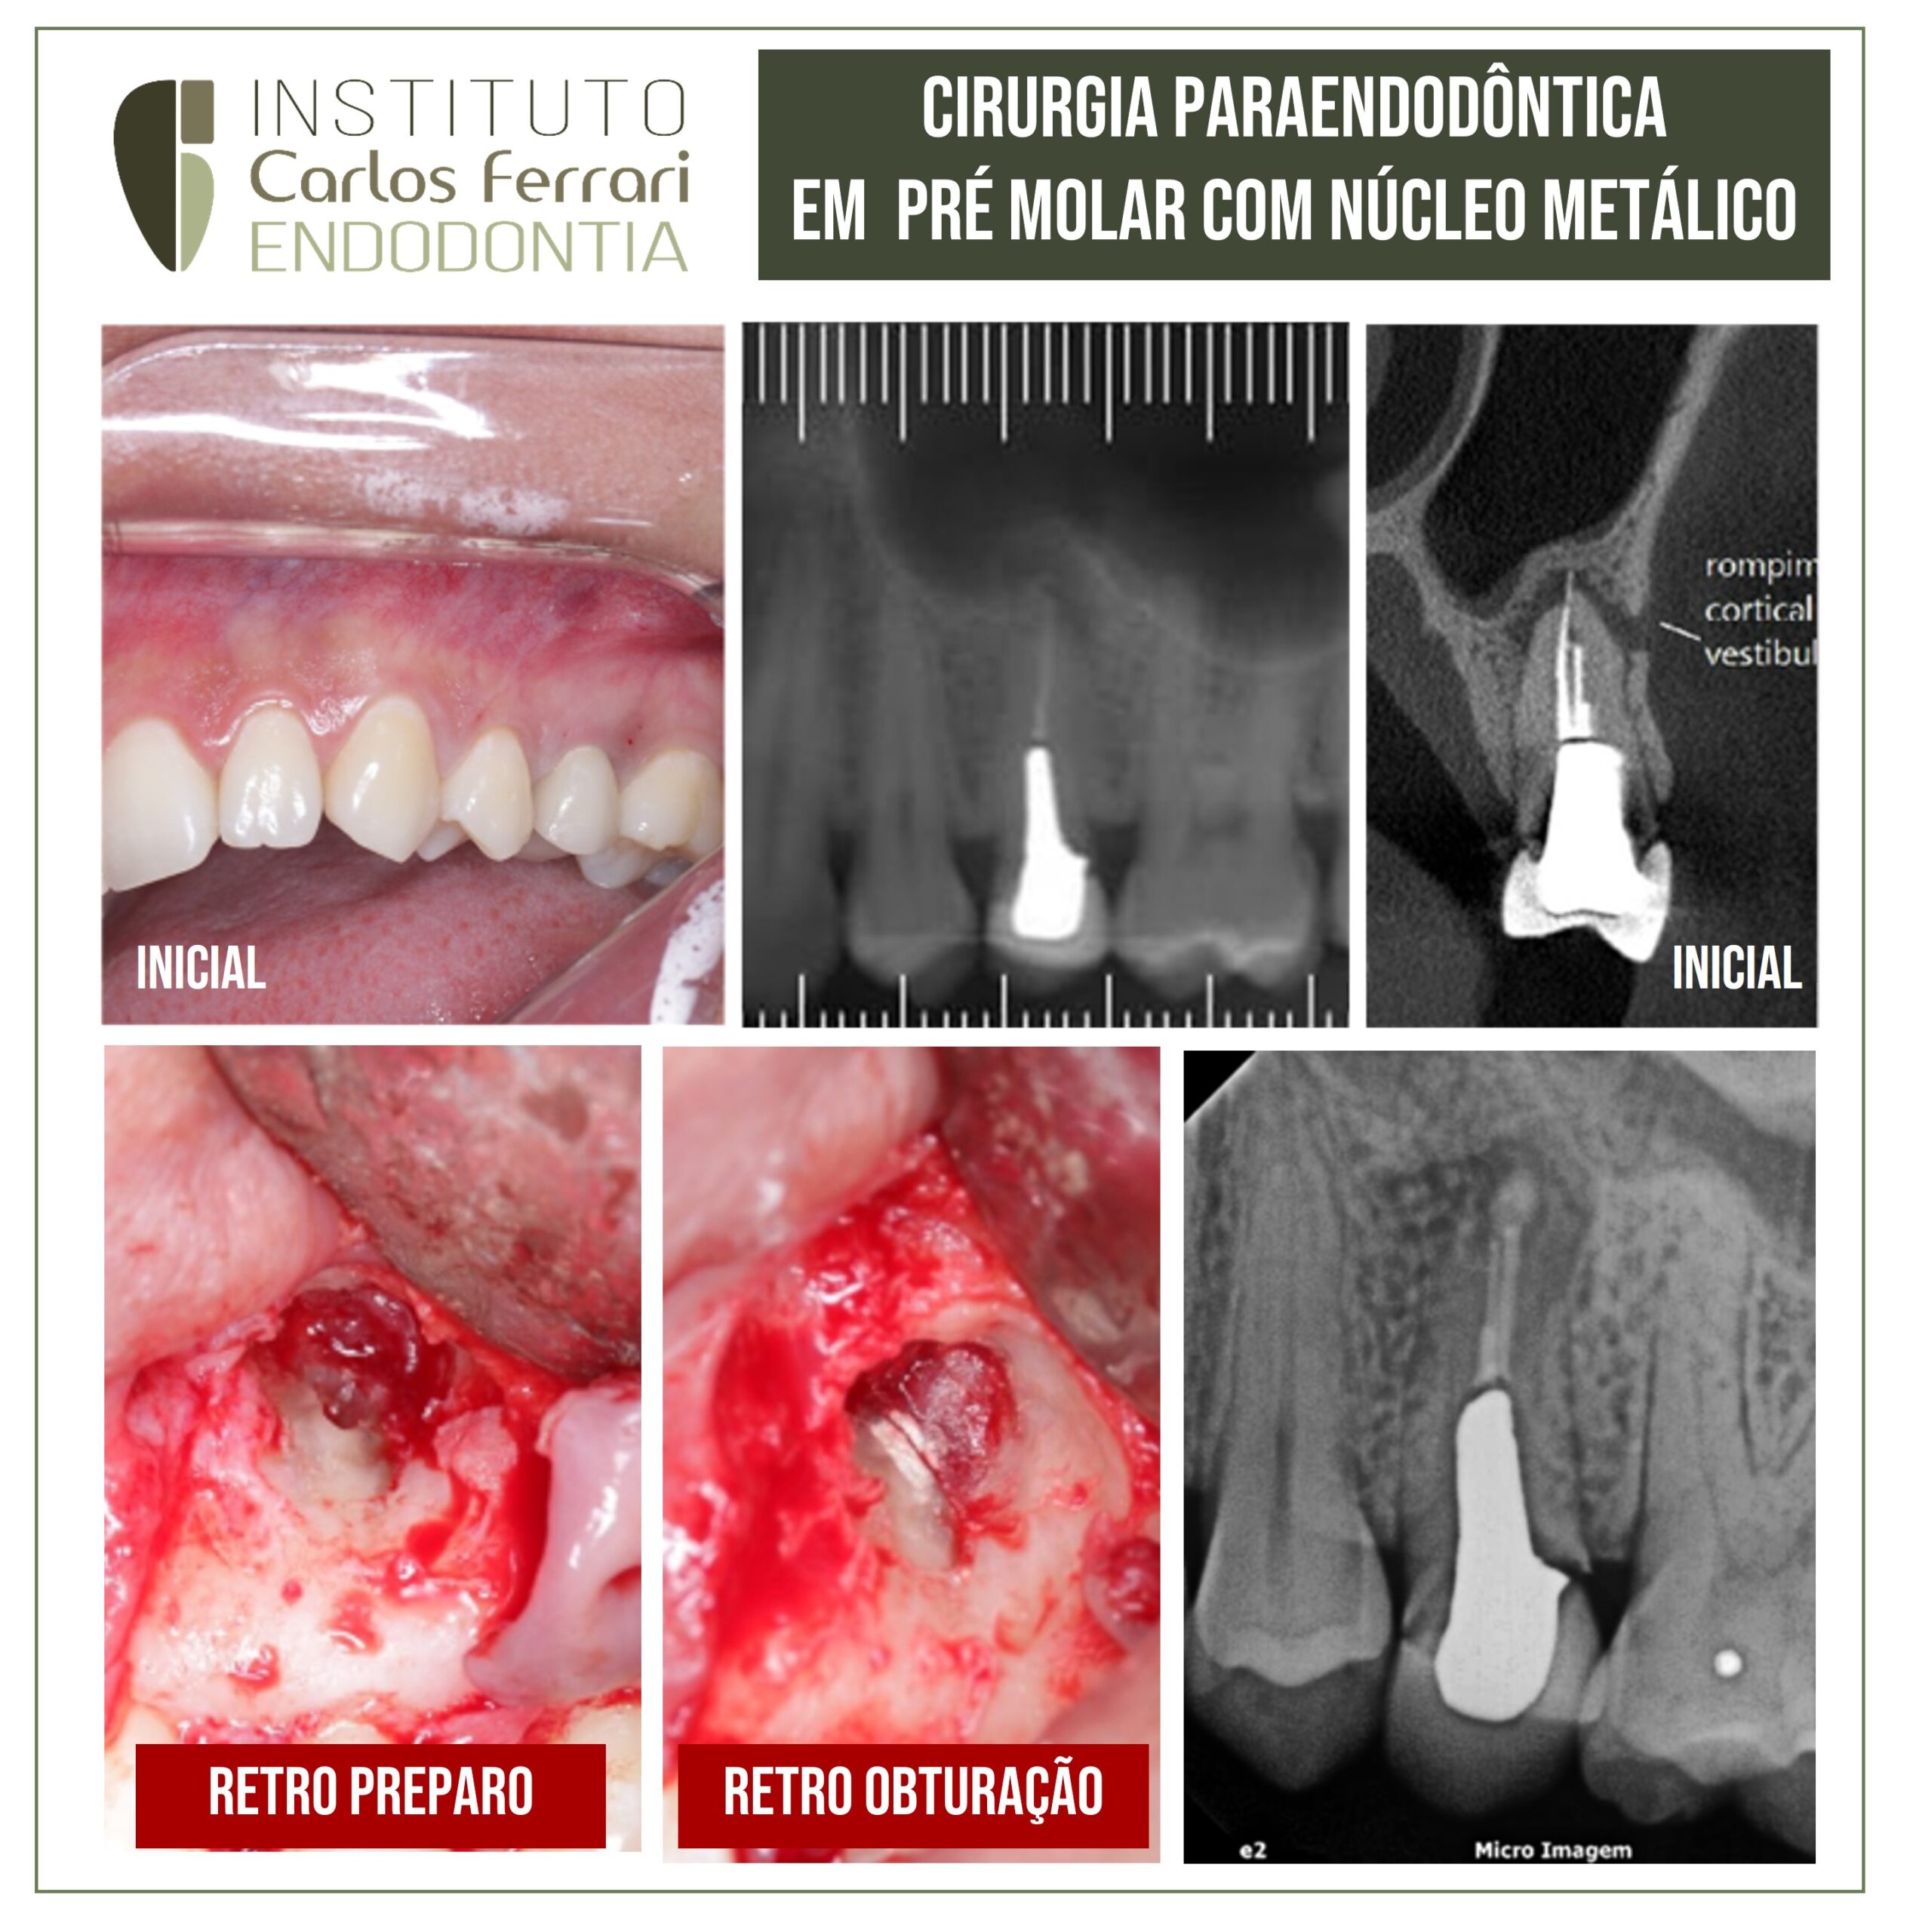 You are currently viewing Paraendodontic surgery on a pre-molar with a metal retainer.